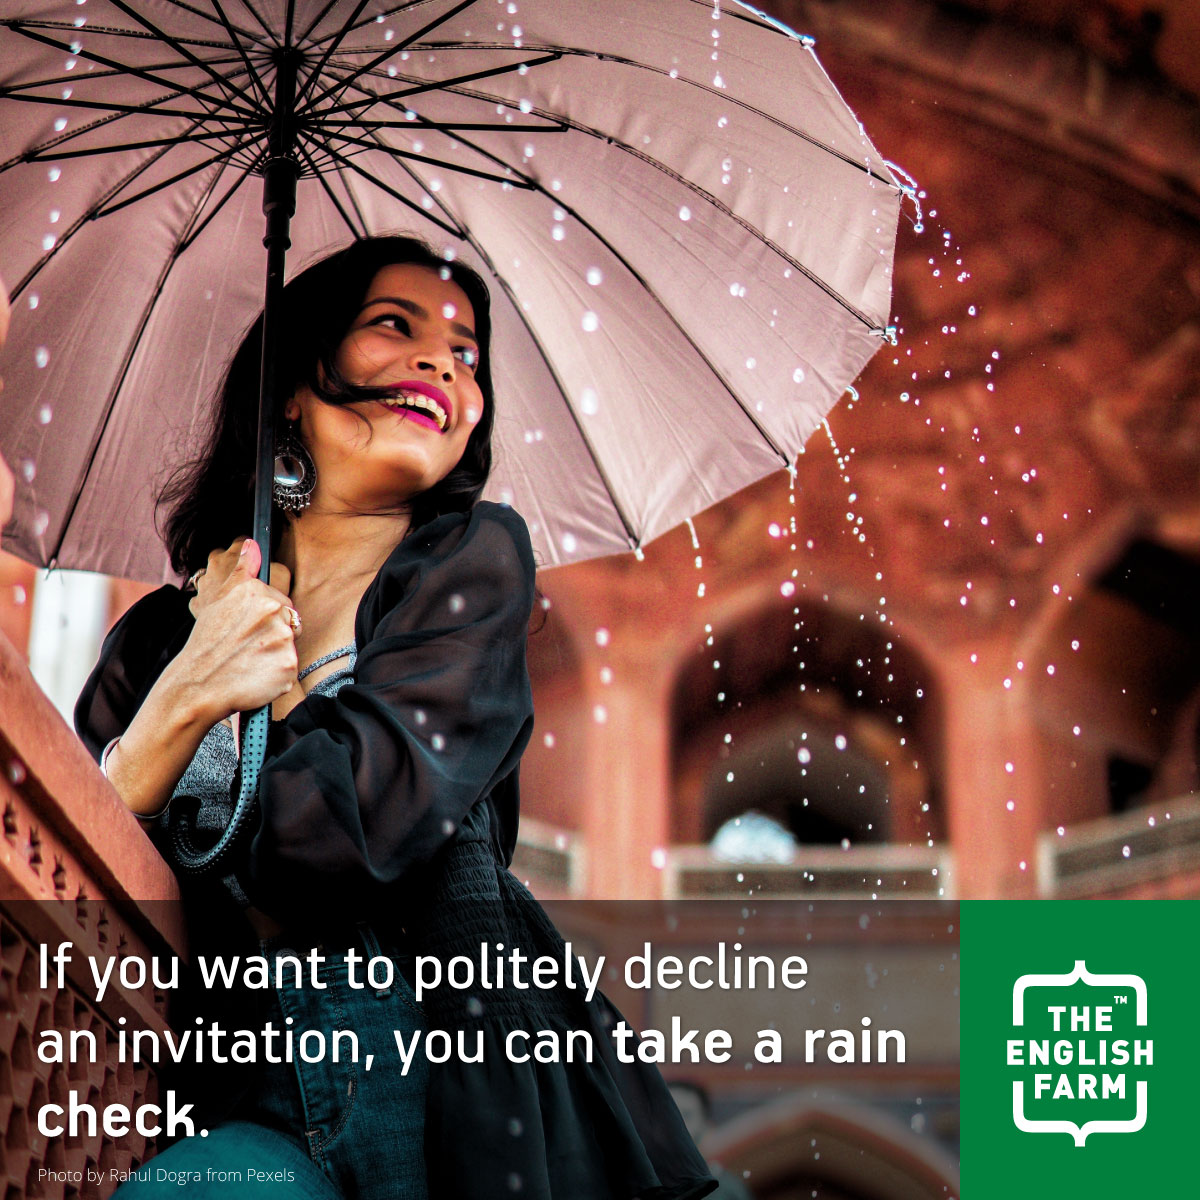 On a stormy day, relax and take a rain check.